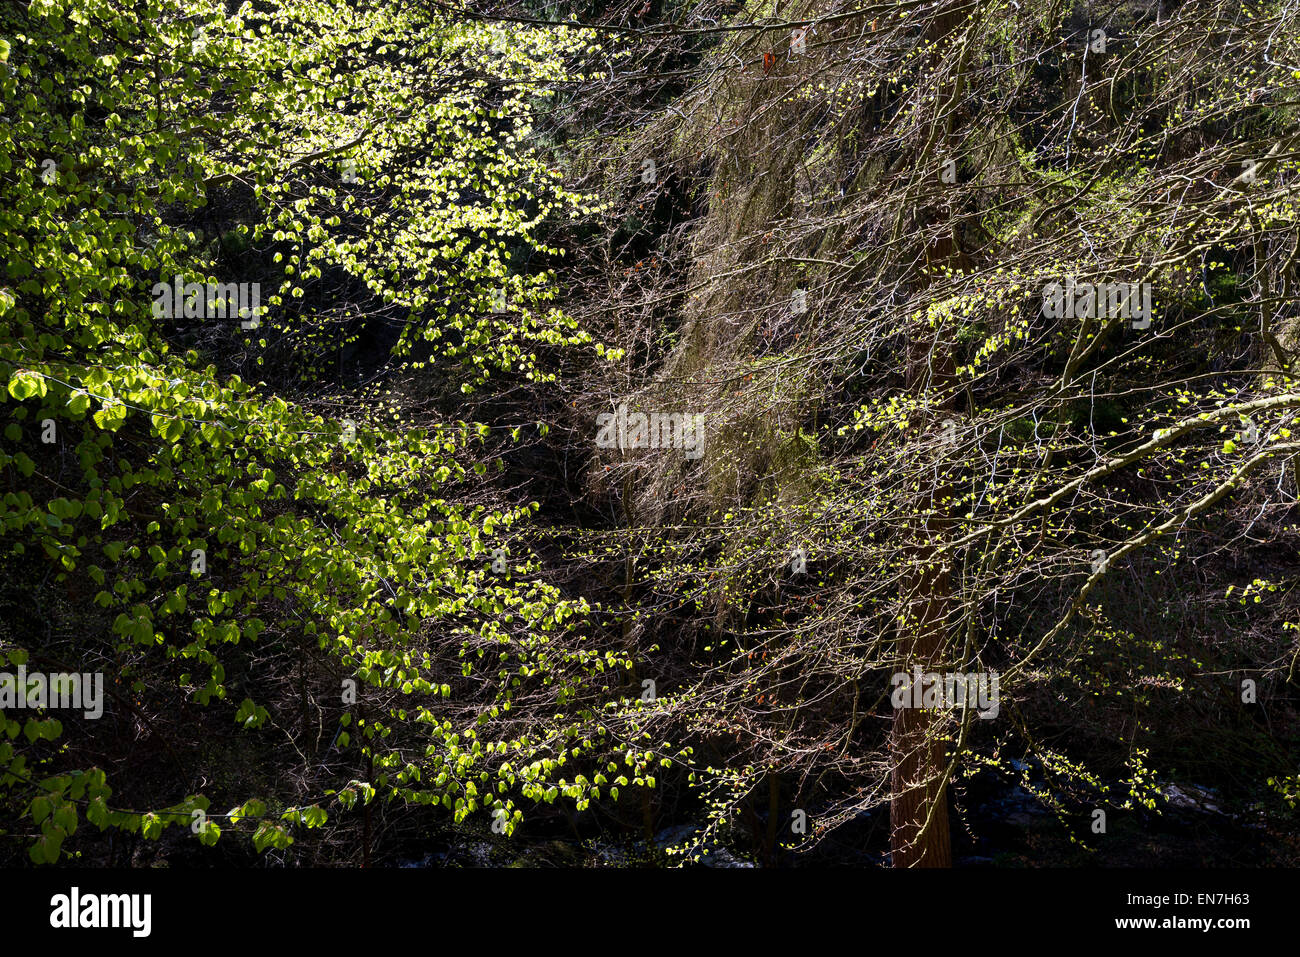 Bright green spring foliage of Beech trees contrasting against a dark background. Stock Photo